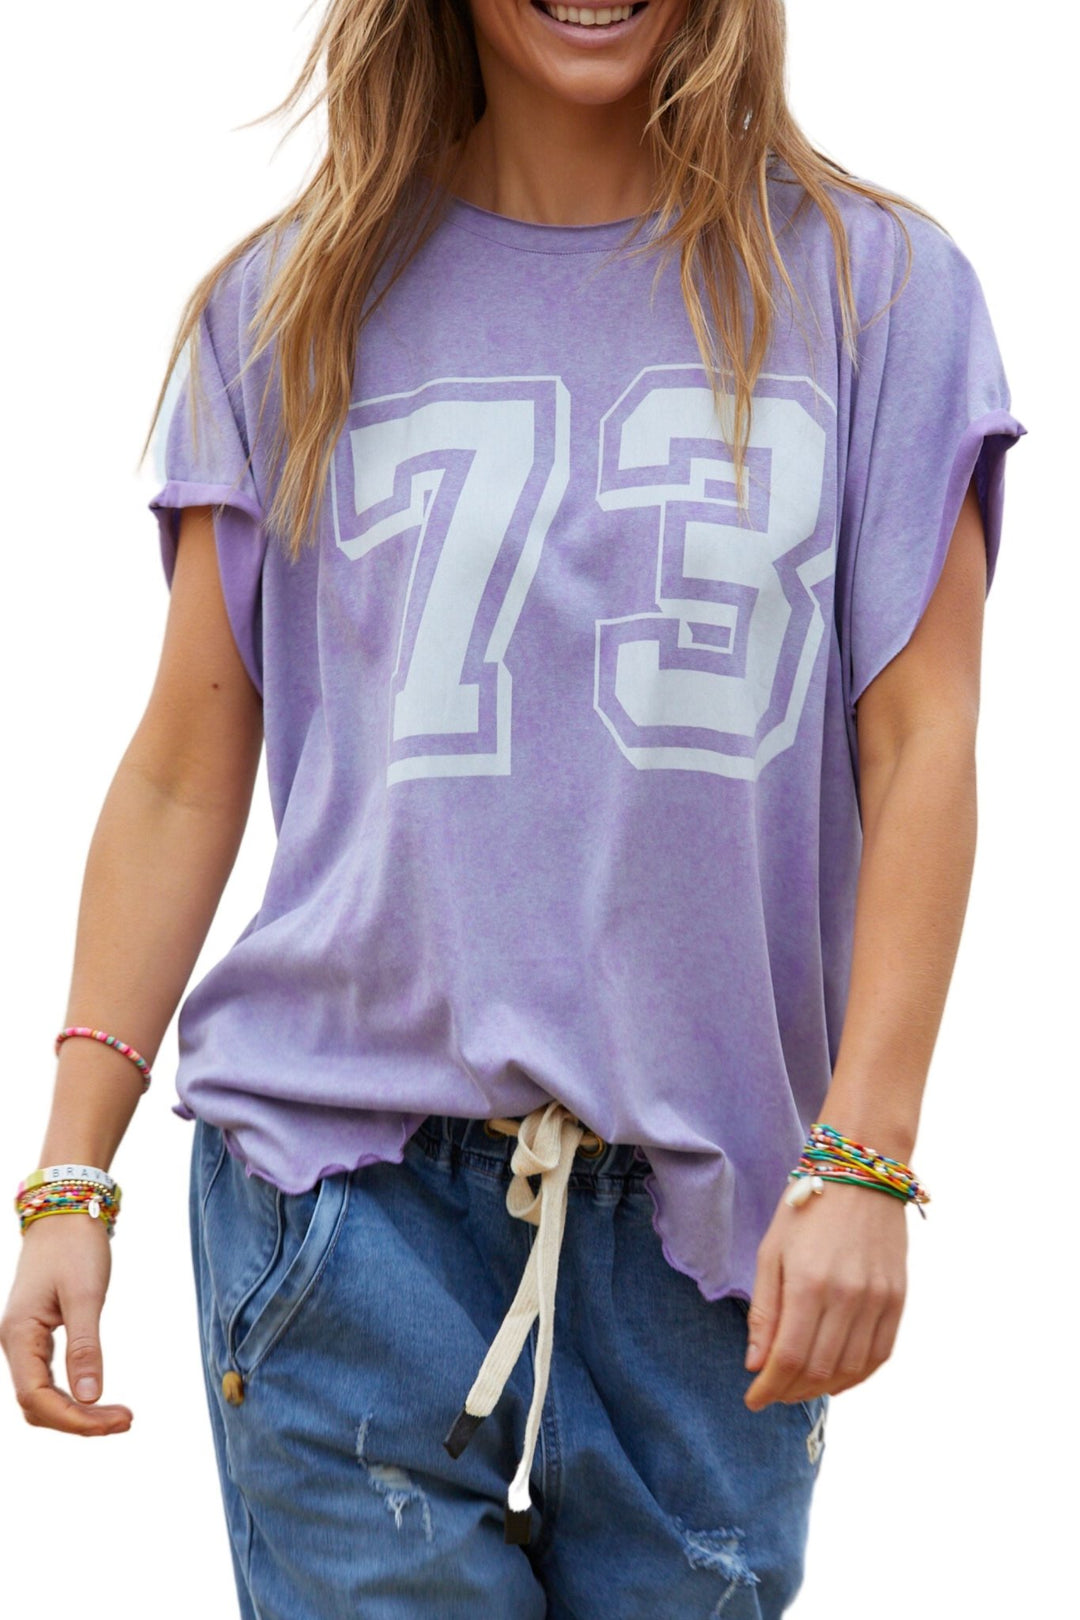 Vintage Wash Rock and Roll tee washed purple - Since I Found You